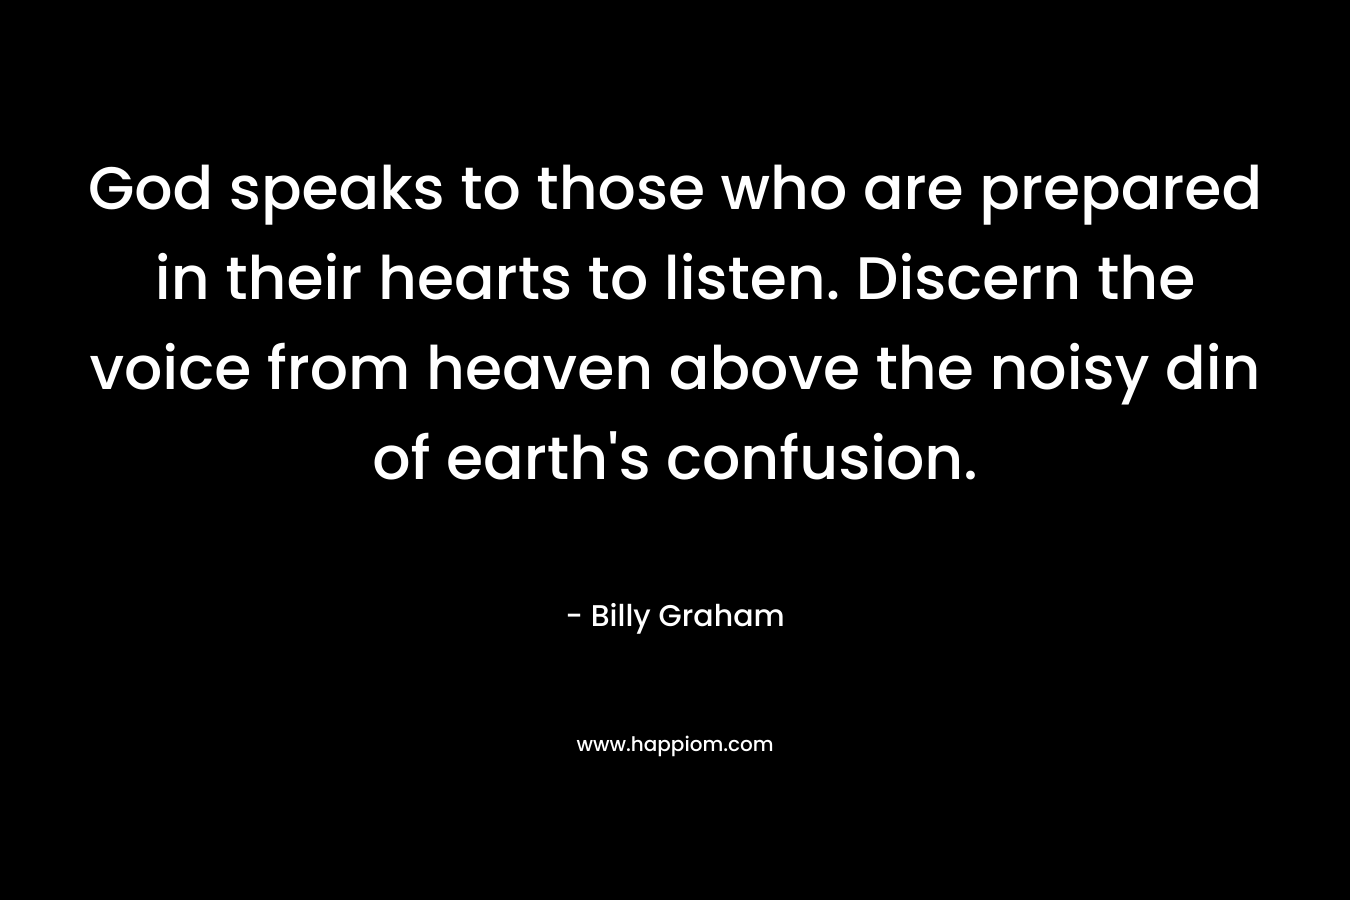 God speaks to those who are prepared in their hearts to listen. Discern the voice from heaven above the noisy din of earth's confusion.